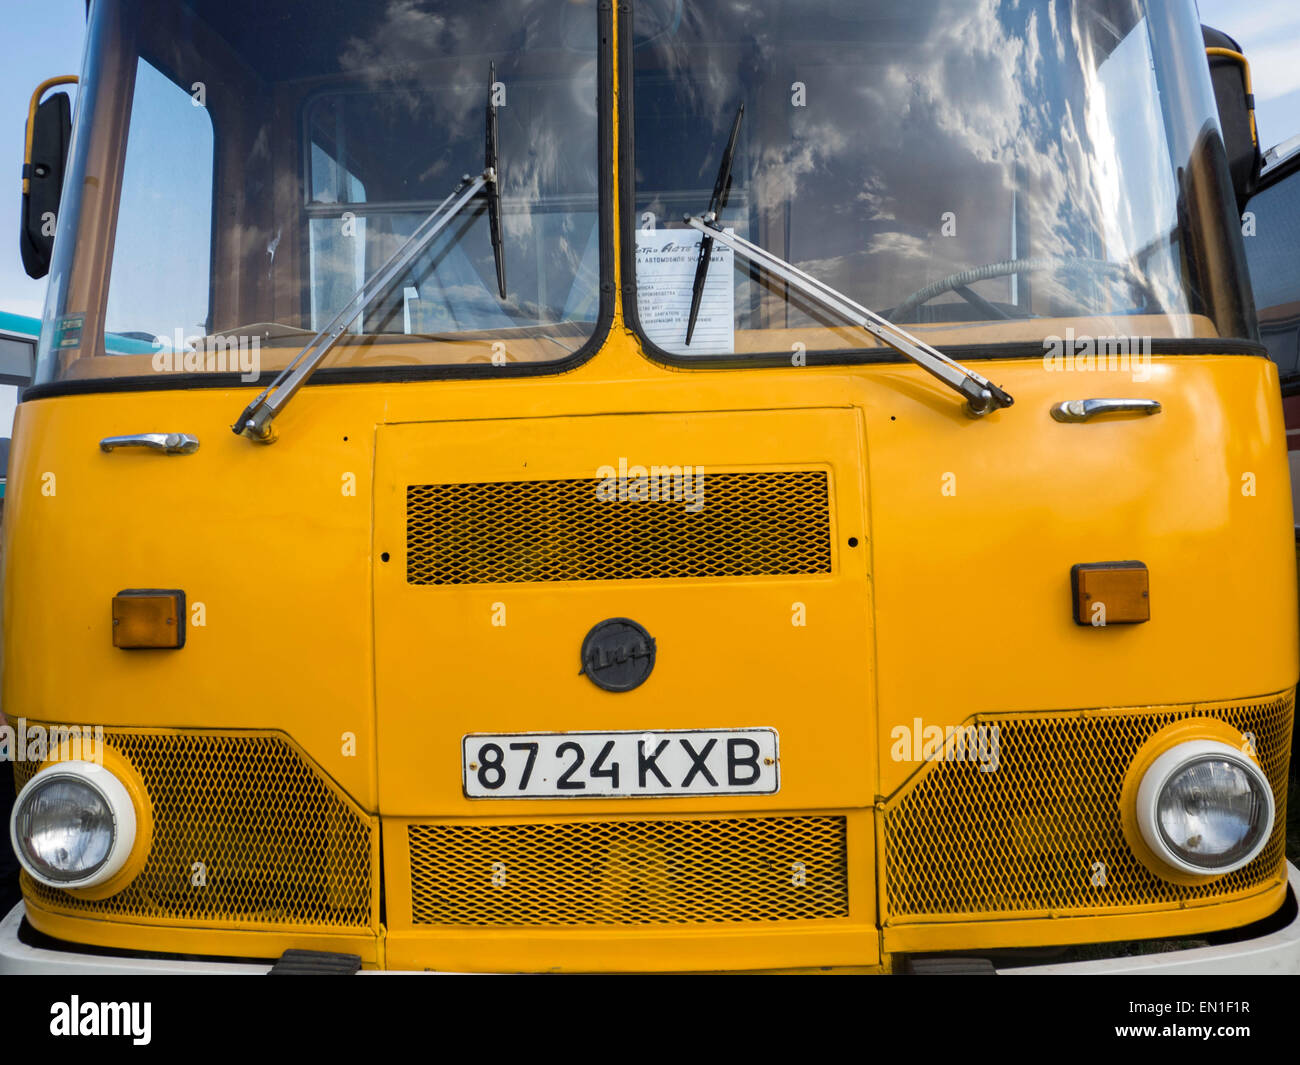 Bus LiAZ-677 -- The Retro OldCarFest is the biggest retro cars festival held in Kiev, and covers the State Aviation Museum grounds. More than 300 cars are involved into this project and more than 20 thousand visitors are expected to attend. Stock Photo